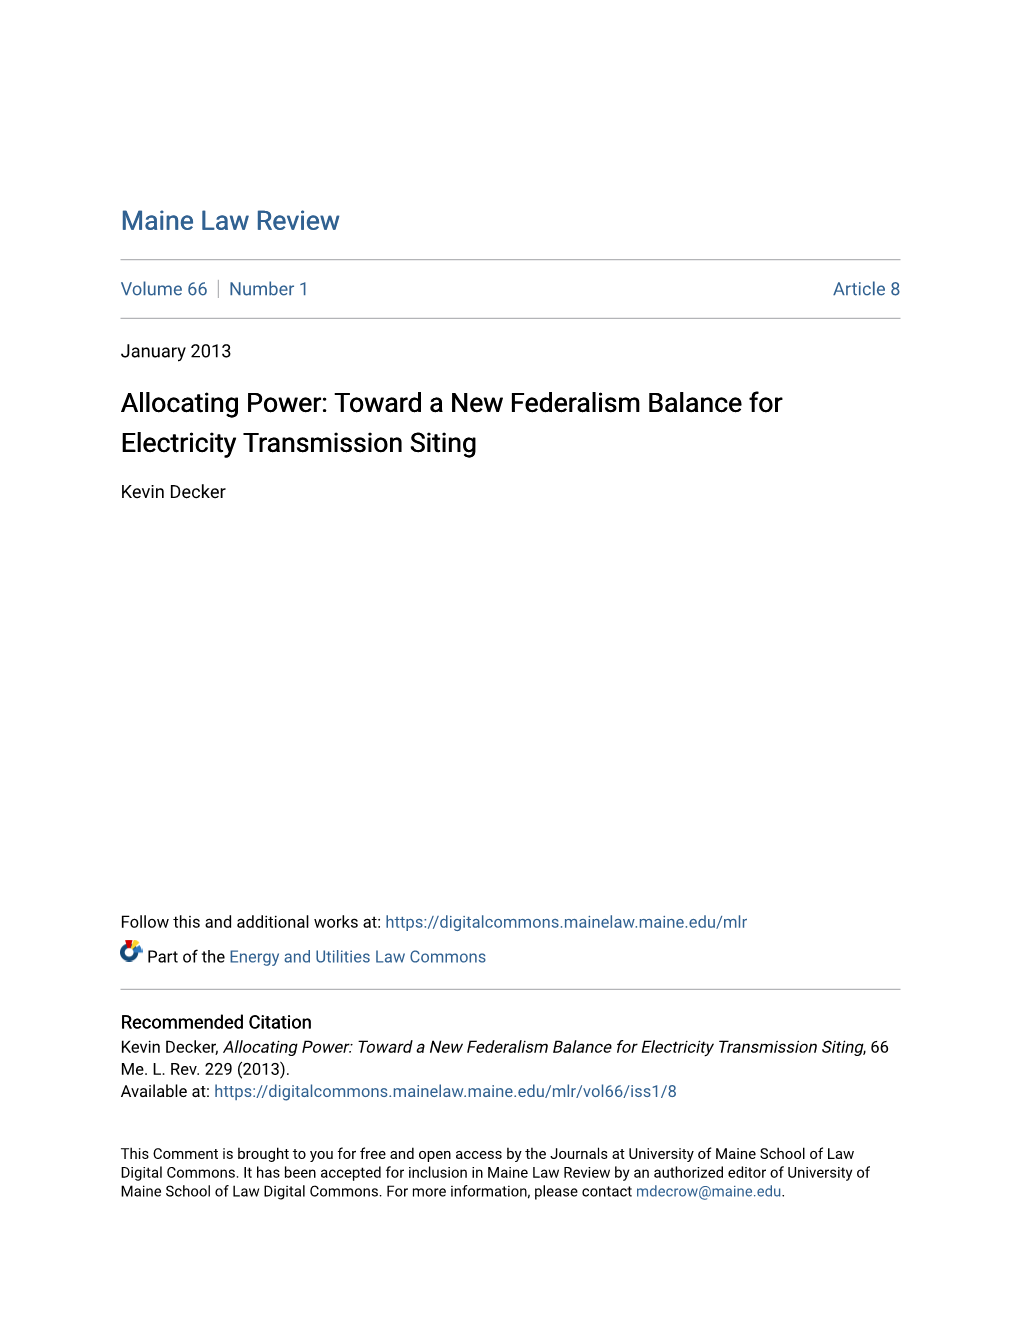 Toward a New Federalism Balance for Electricity Transmission Siting